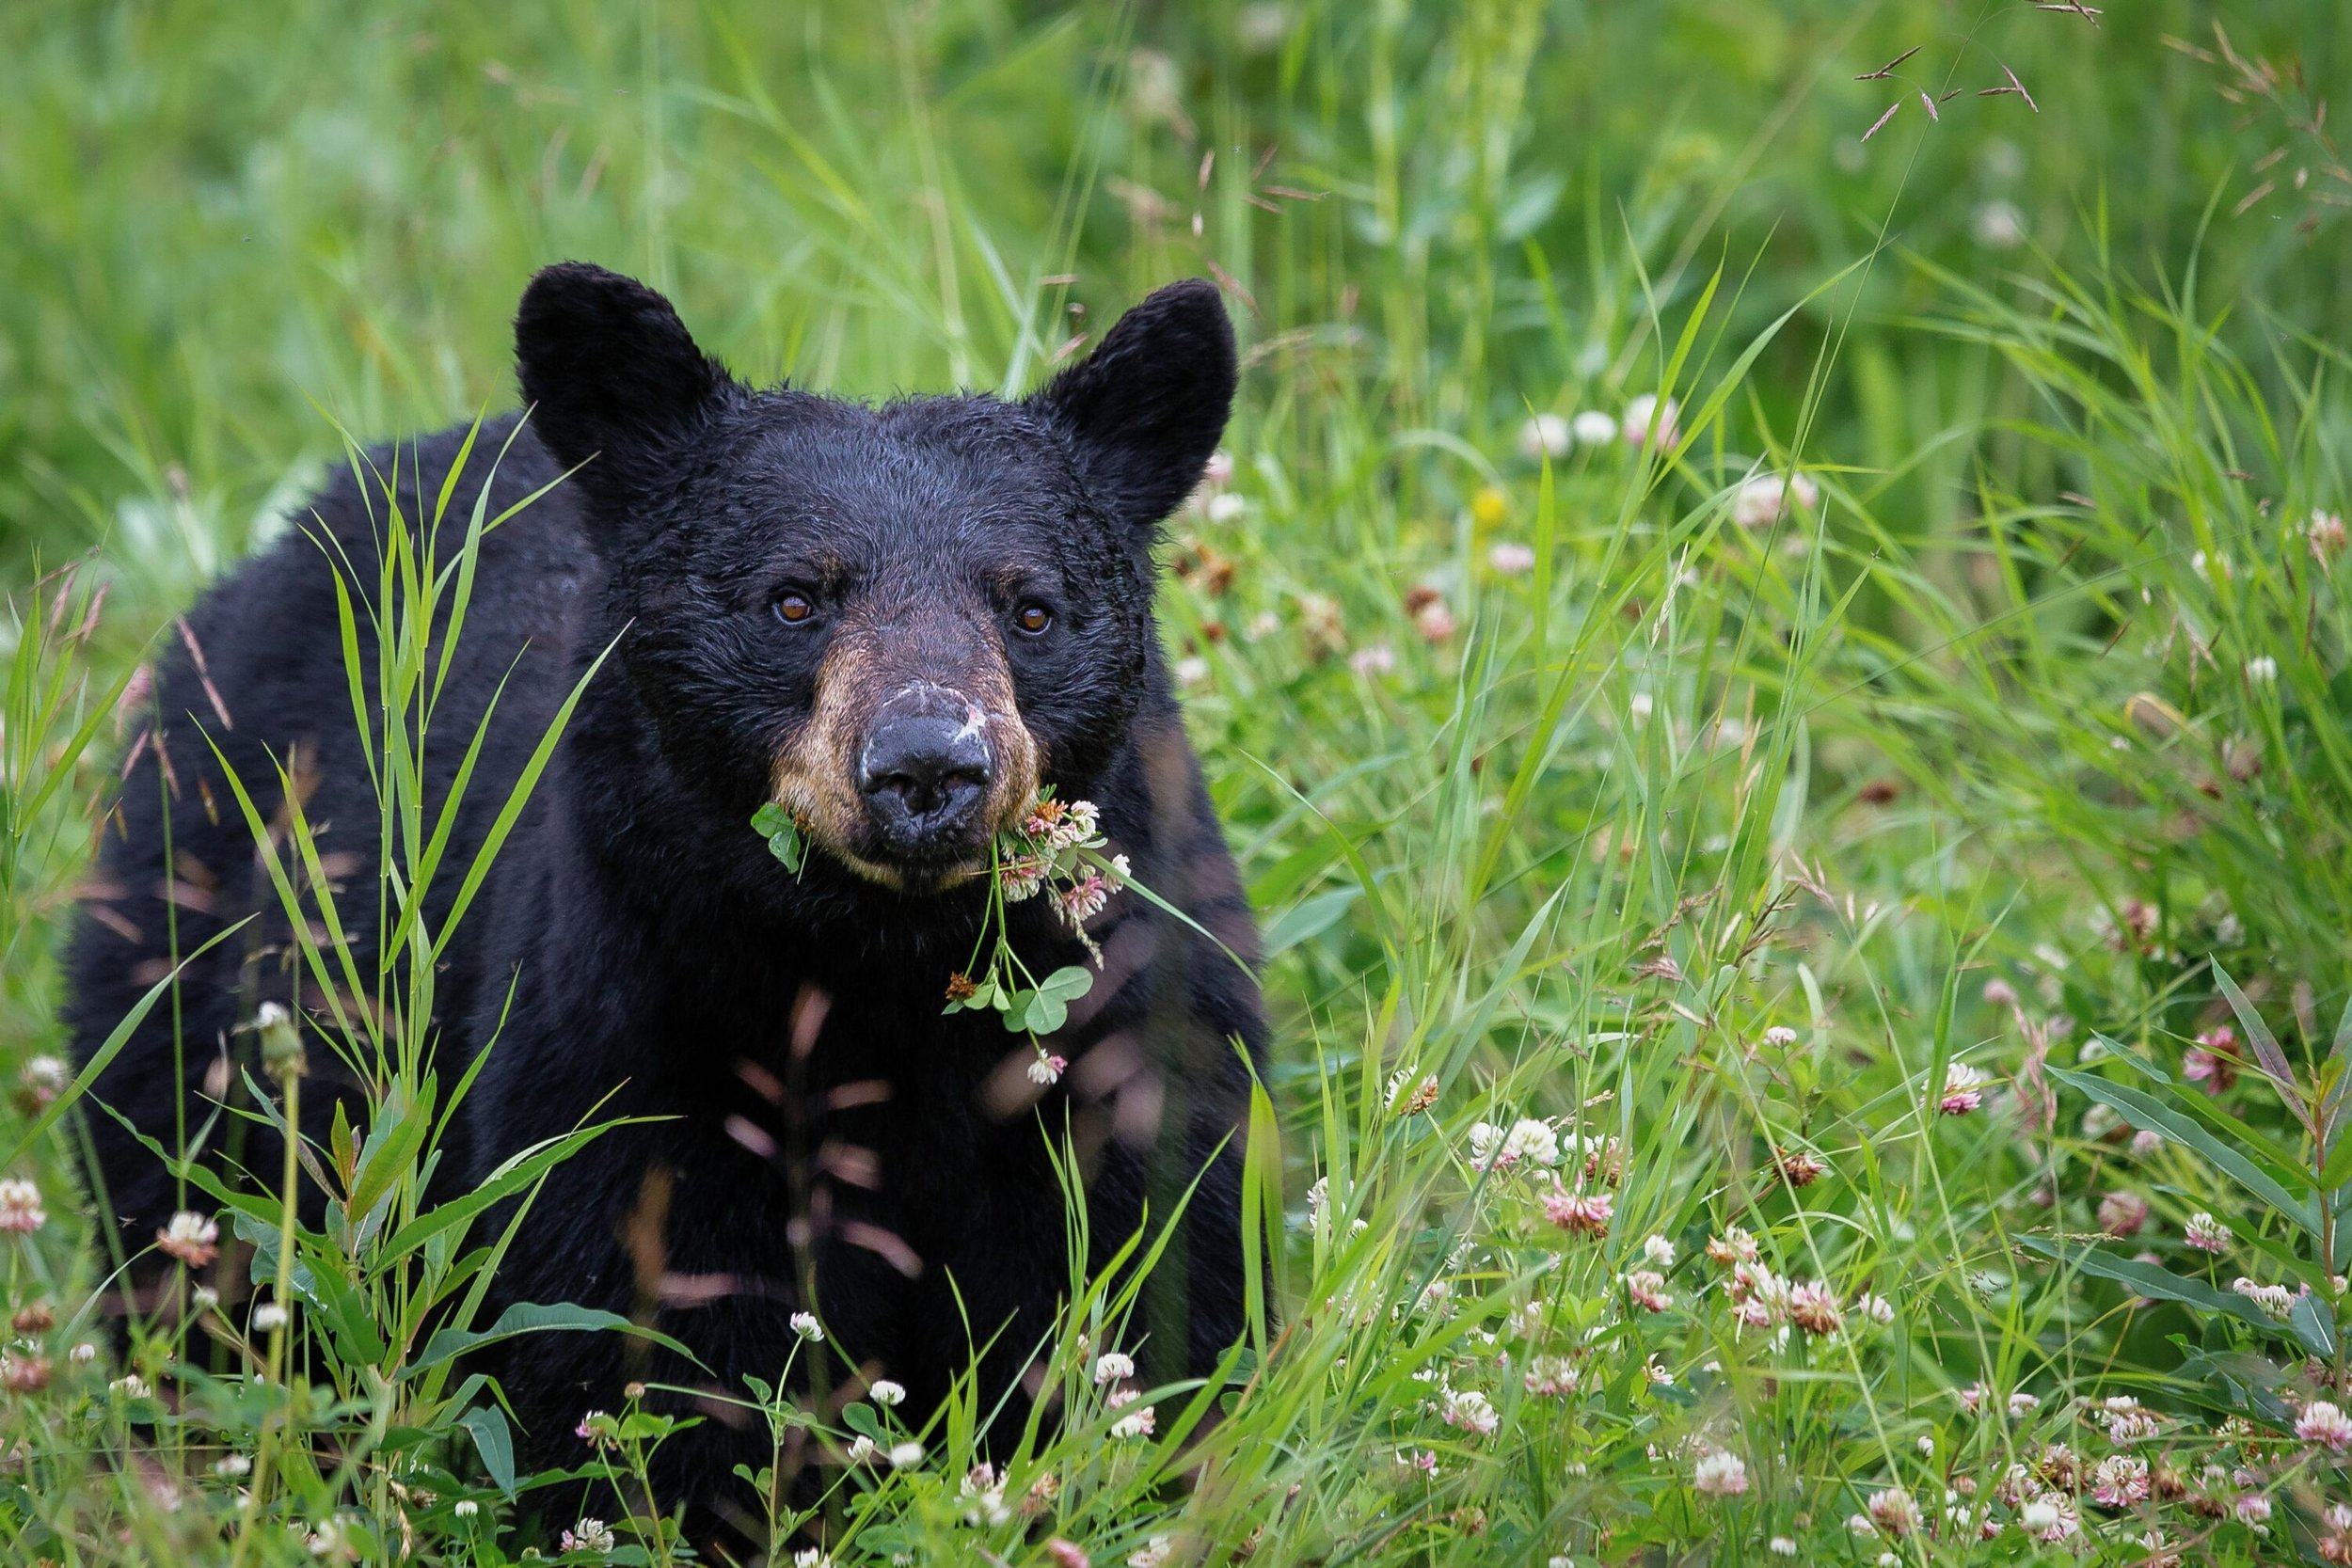 The mission of Swan Valley Bear Resources is to offer community resources to promote coexistence between people and bears. The two most prominent human attractants in our area are garbage and chickens. Securing these attractants with electric fencing